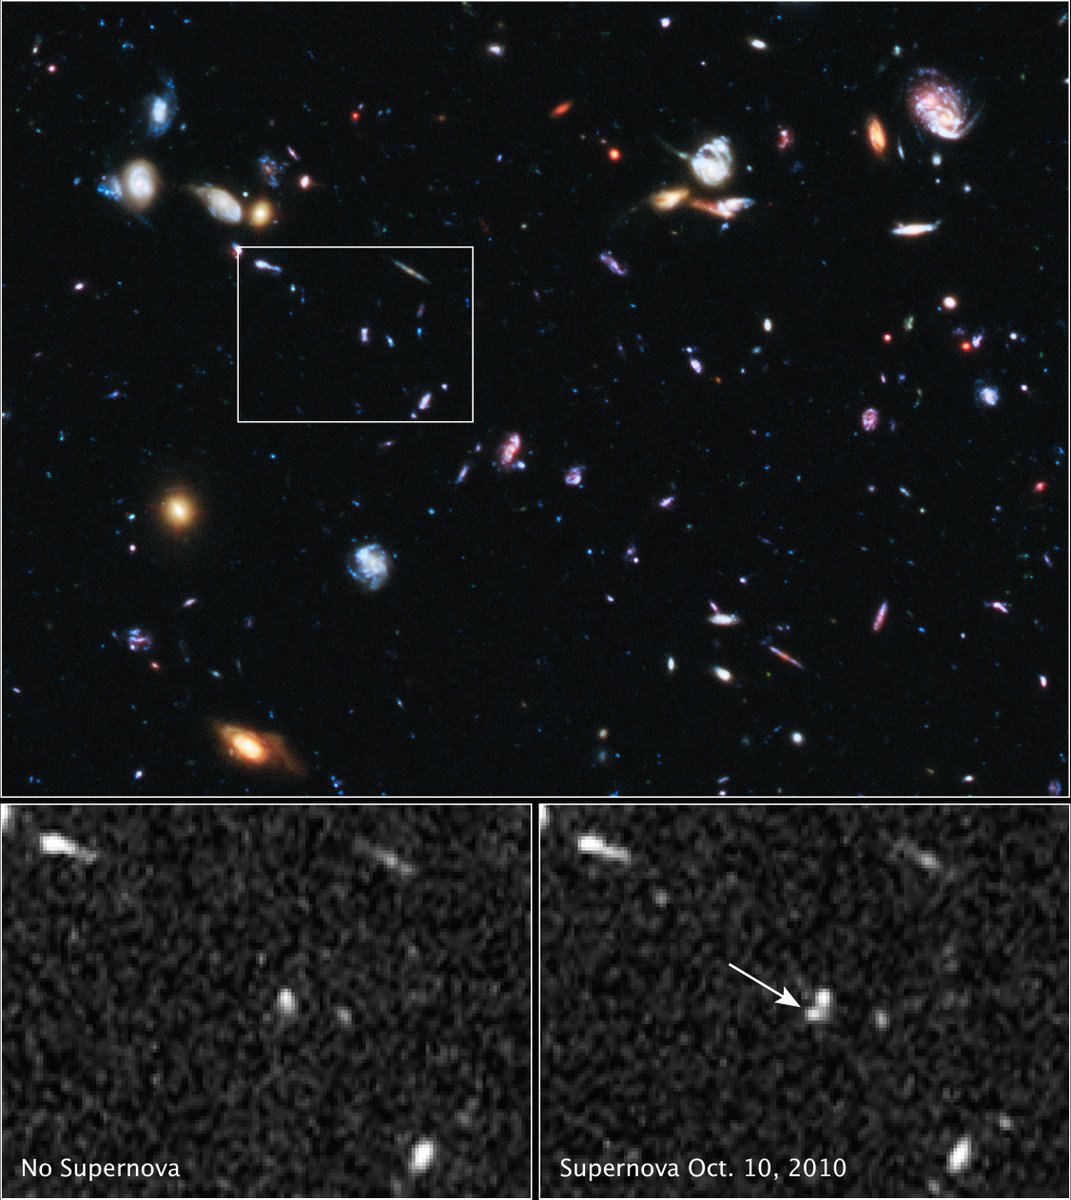 When Hubble detected Supernova Primo in 2011, it was the farthest Type Ia supernova known at the time with a confirmed distance. The feeble glow came from a star that exploded more than 9 billion years ago! It was discovered in a Hubble survey program: bit.ly/3VxV7lp